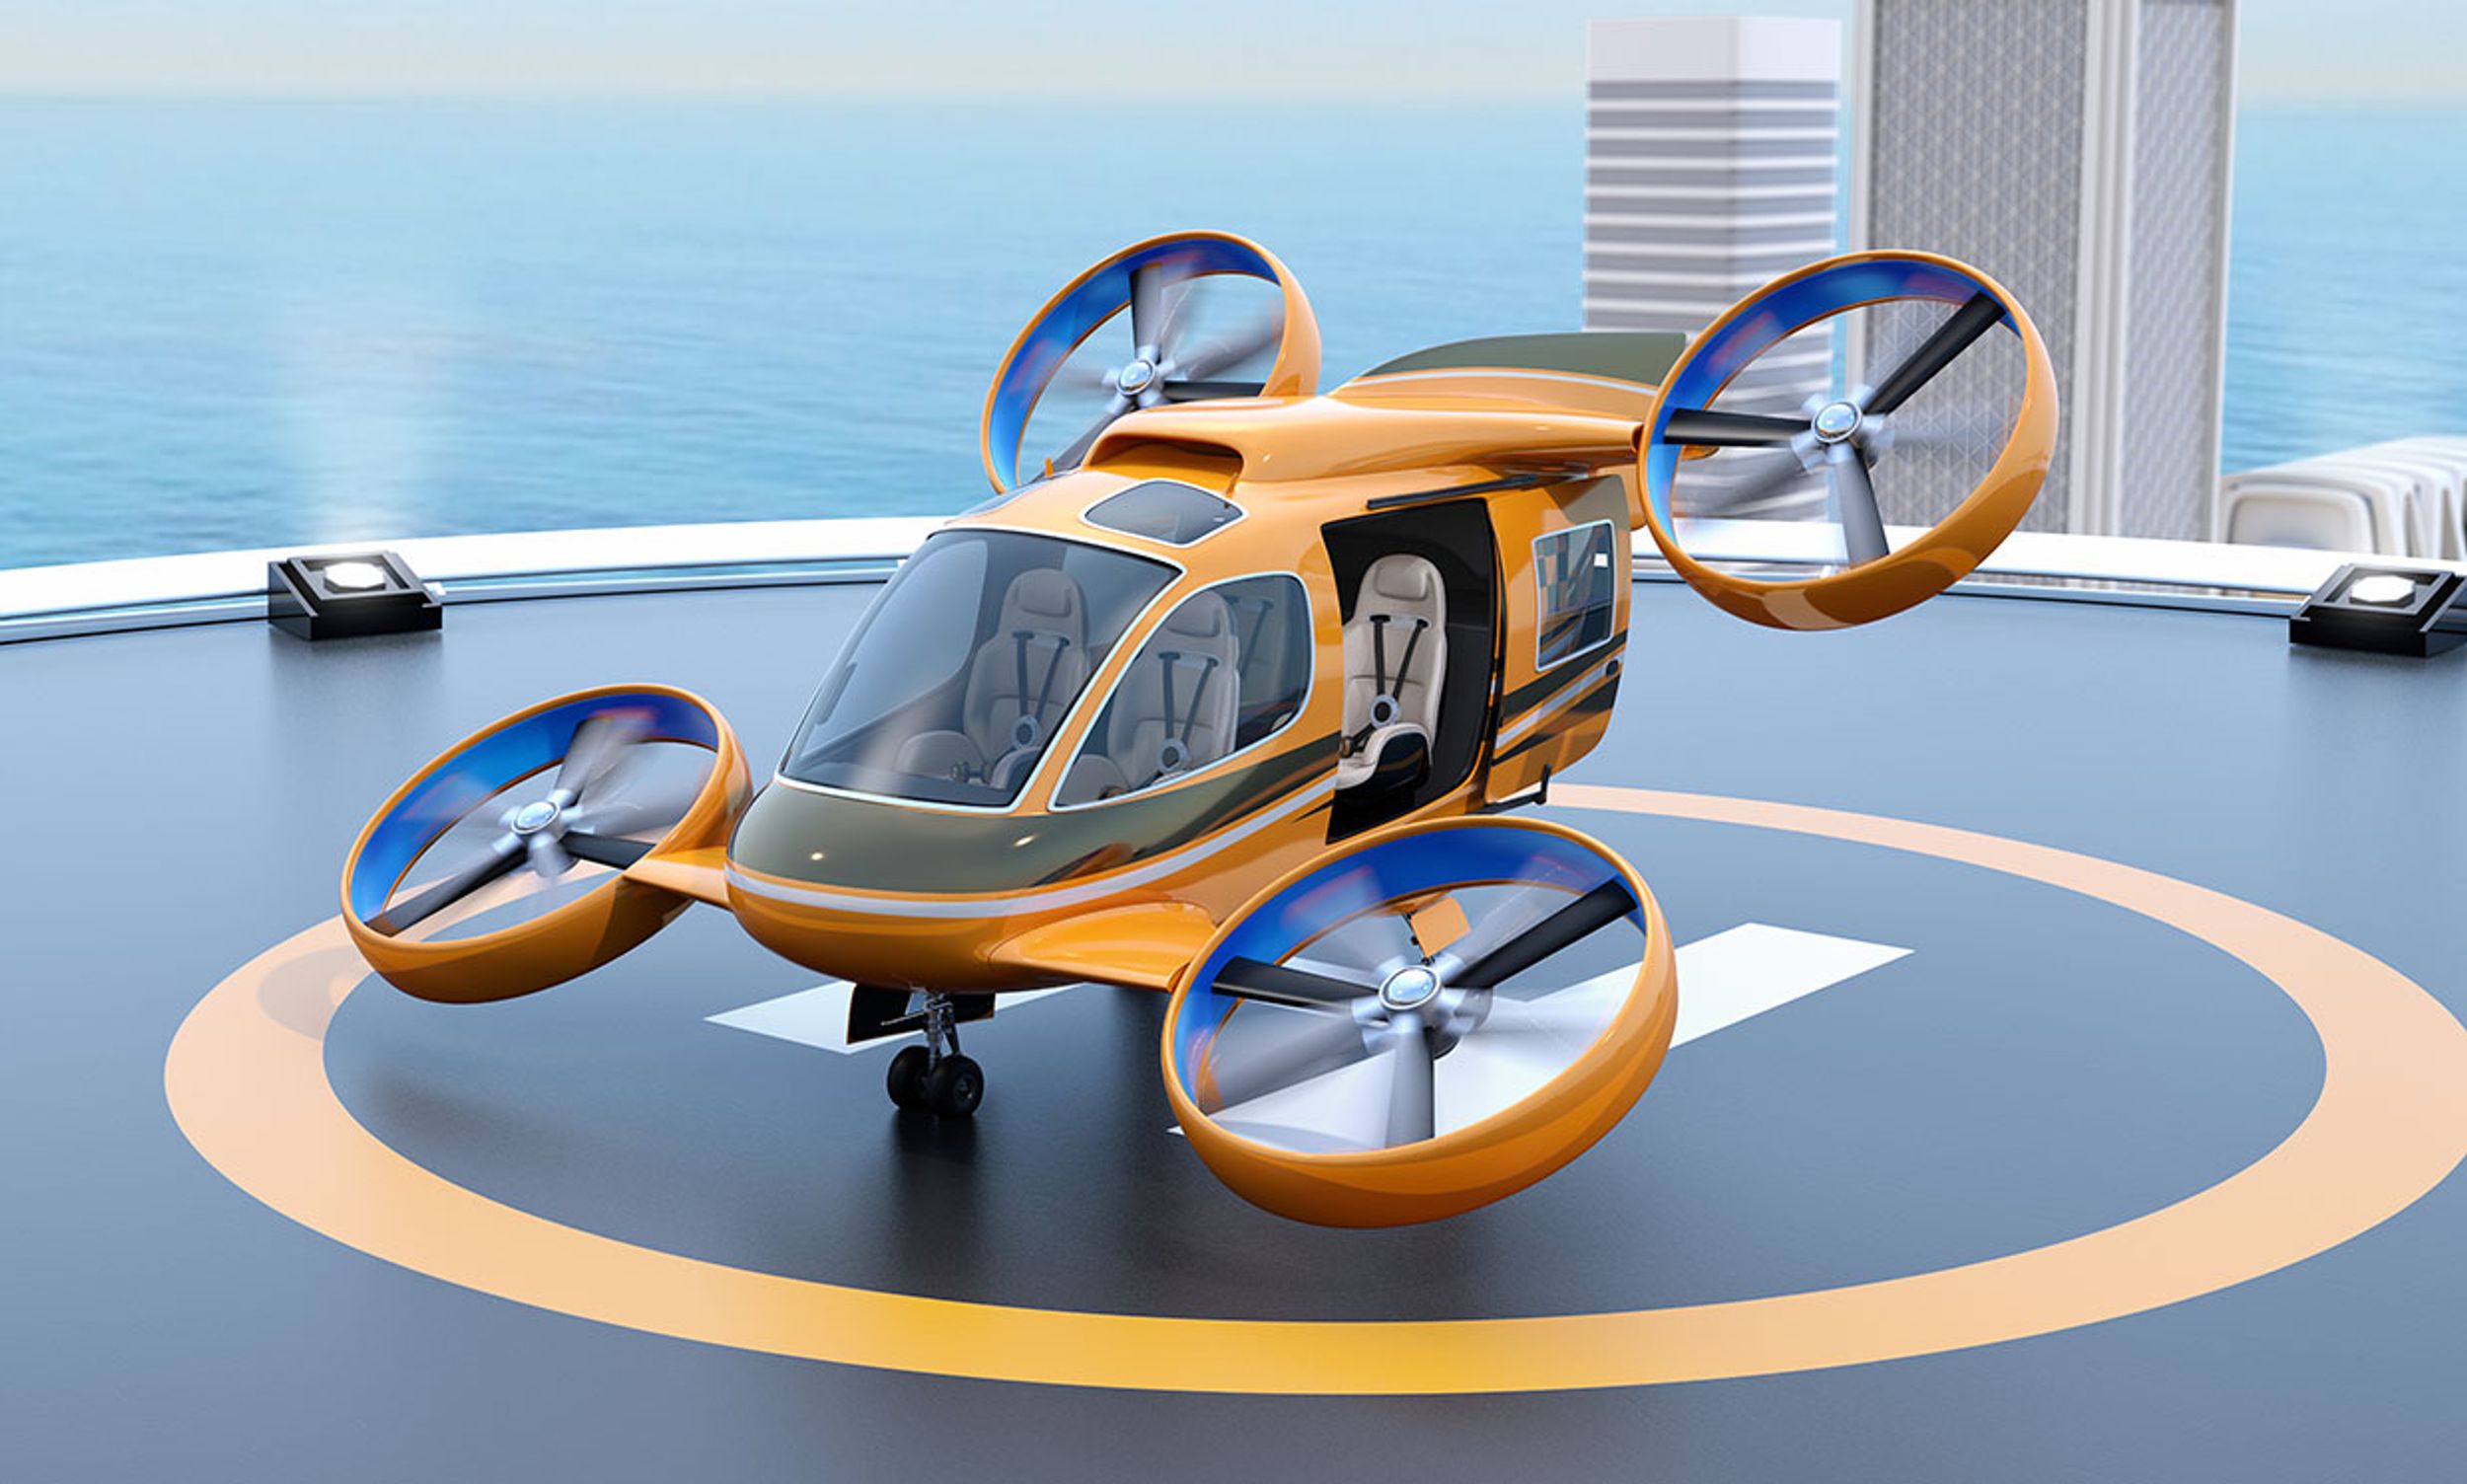 Conceptual illustration of an air taxi on a landing pad.